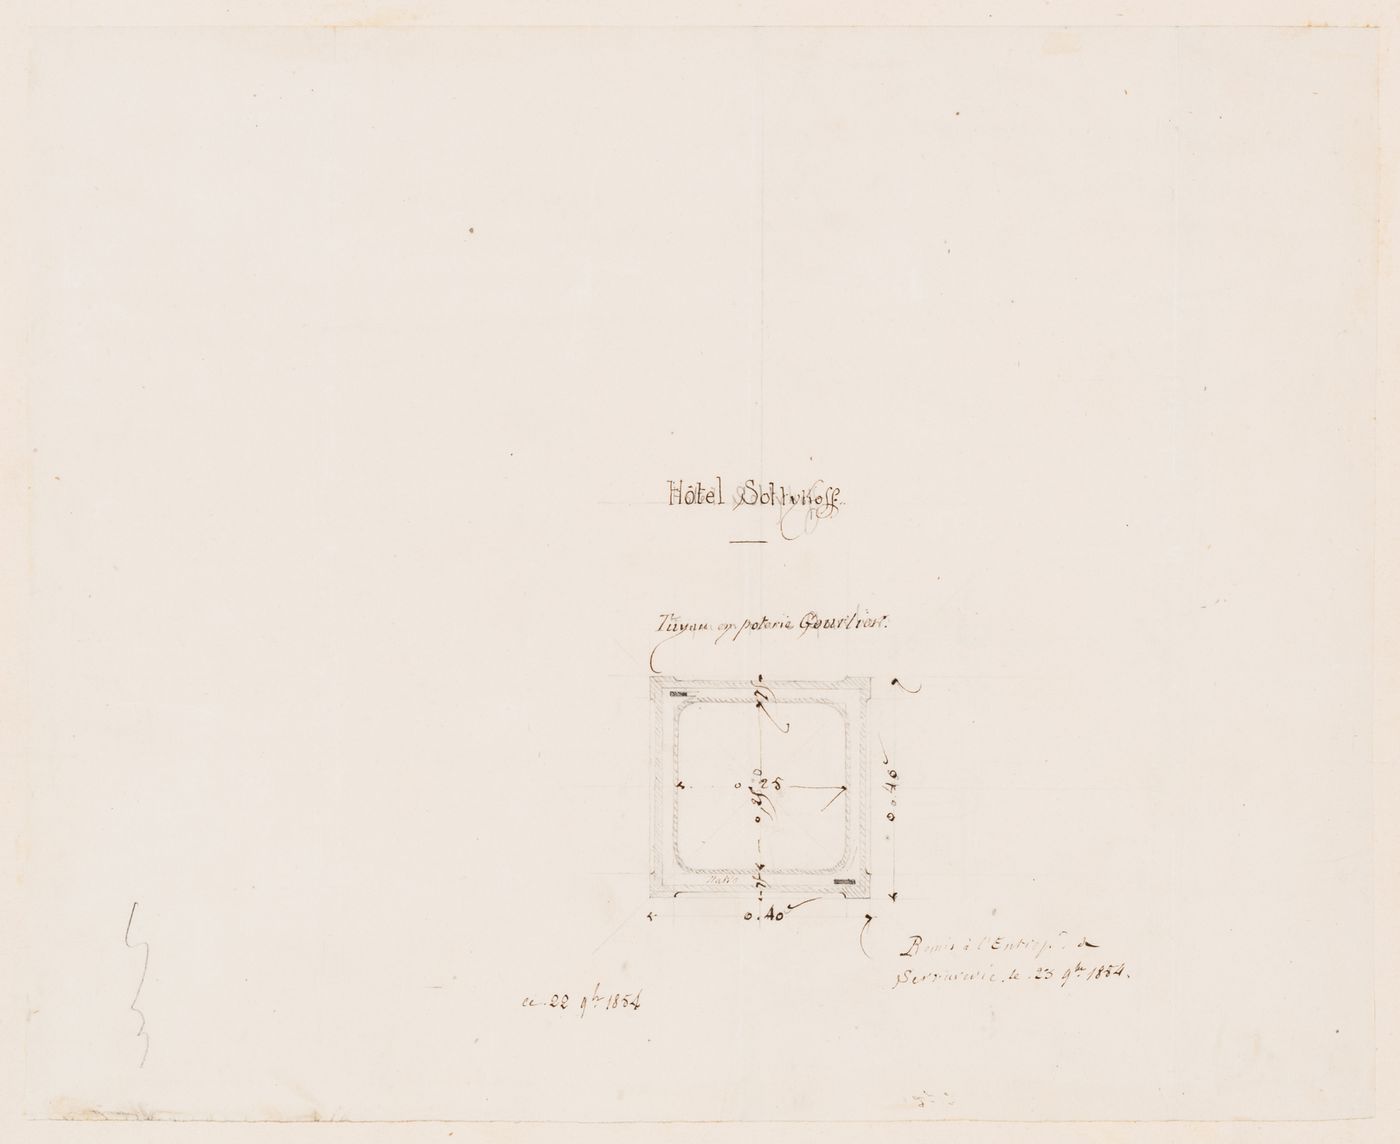 Elevations and plan for the "petit cour", showing the arrangement of the interior staircase, Hôtel Soltykoff; verso: Section for an earthenware pipe, probably for Hôtel Soltykoff